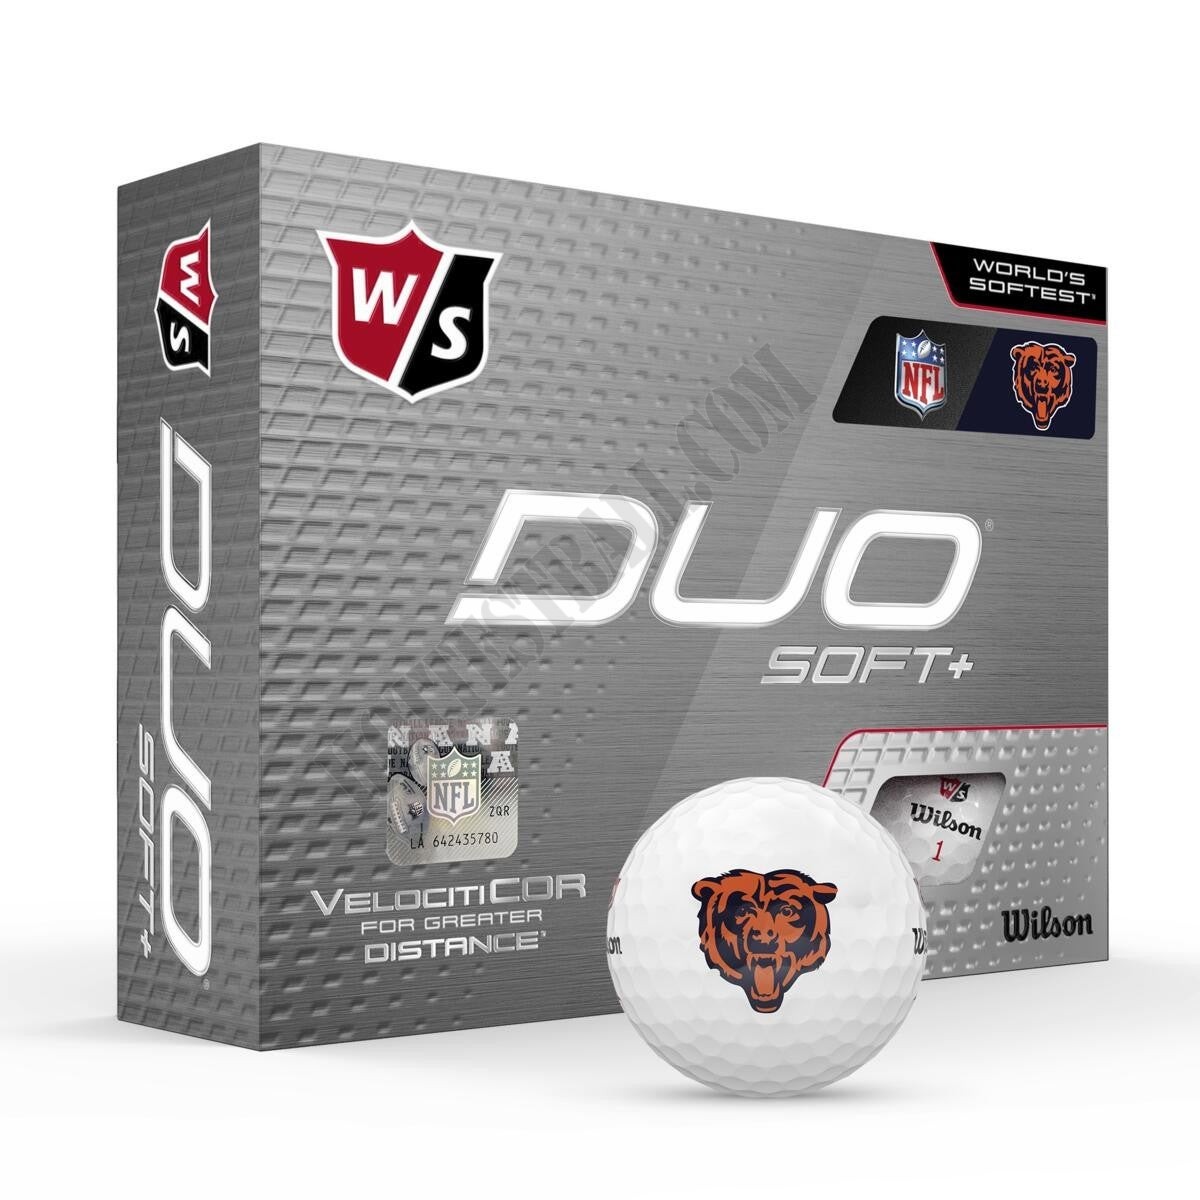 DUO Soft+ NFL Golf Balls - Chicago Bears ● Wilson Promotions - DUO Soft+ NFL Golf Balls - Chicago Bears ● Wilson Promotions